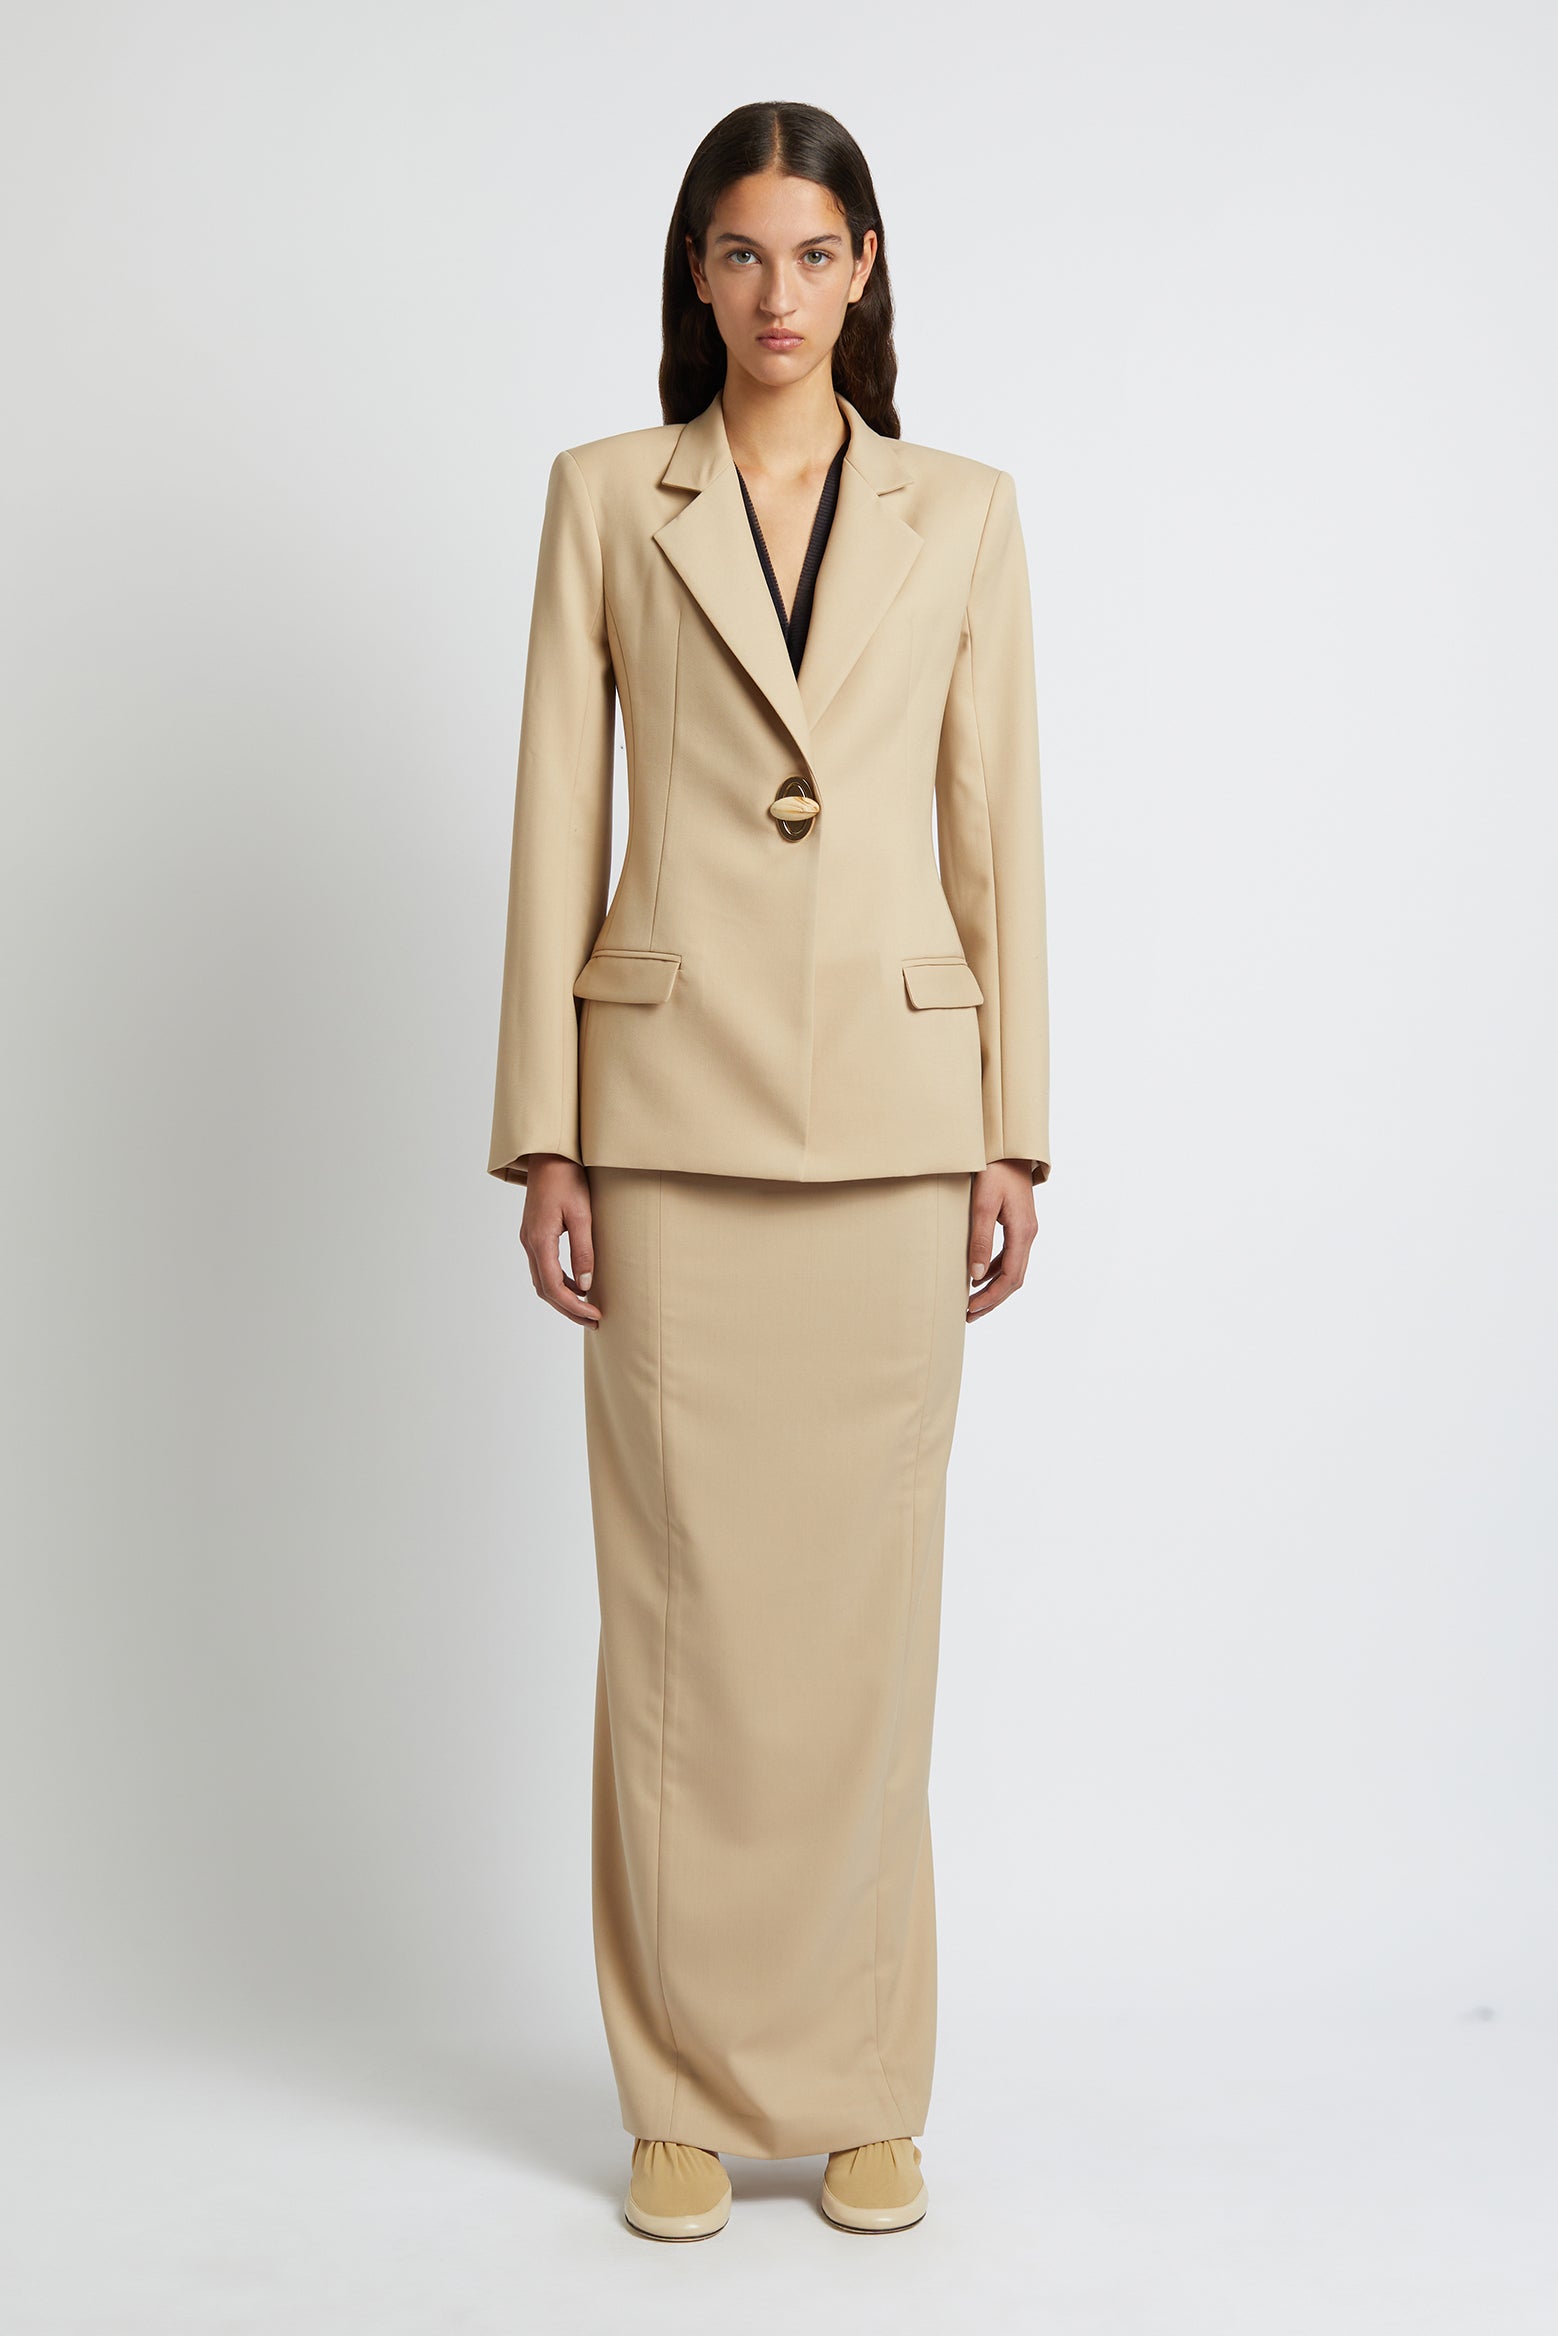 Christopher Esber Apex Racquet Blazer in Sand available at The New Trend Australia.